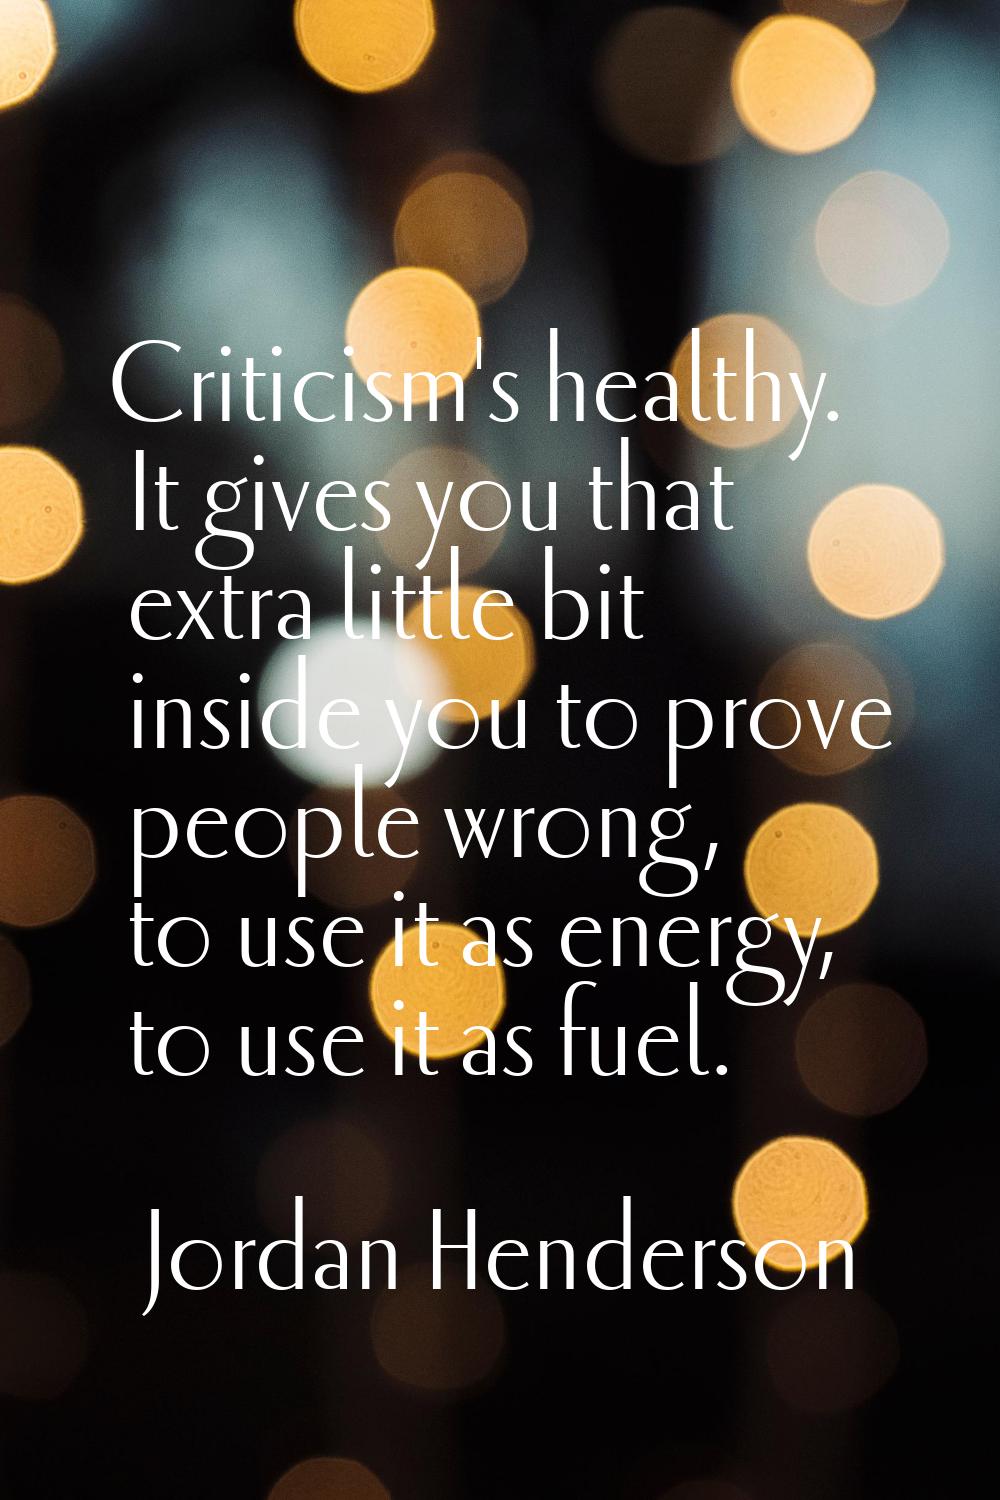 Criticism's healthy. It gives you that extra little bit inside you to prove people wrong, to use it